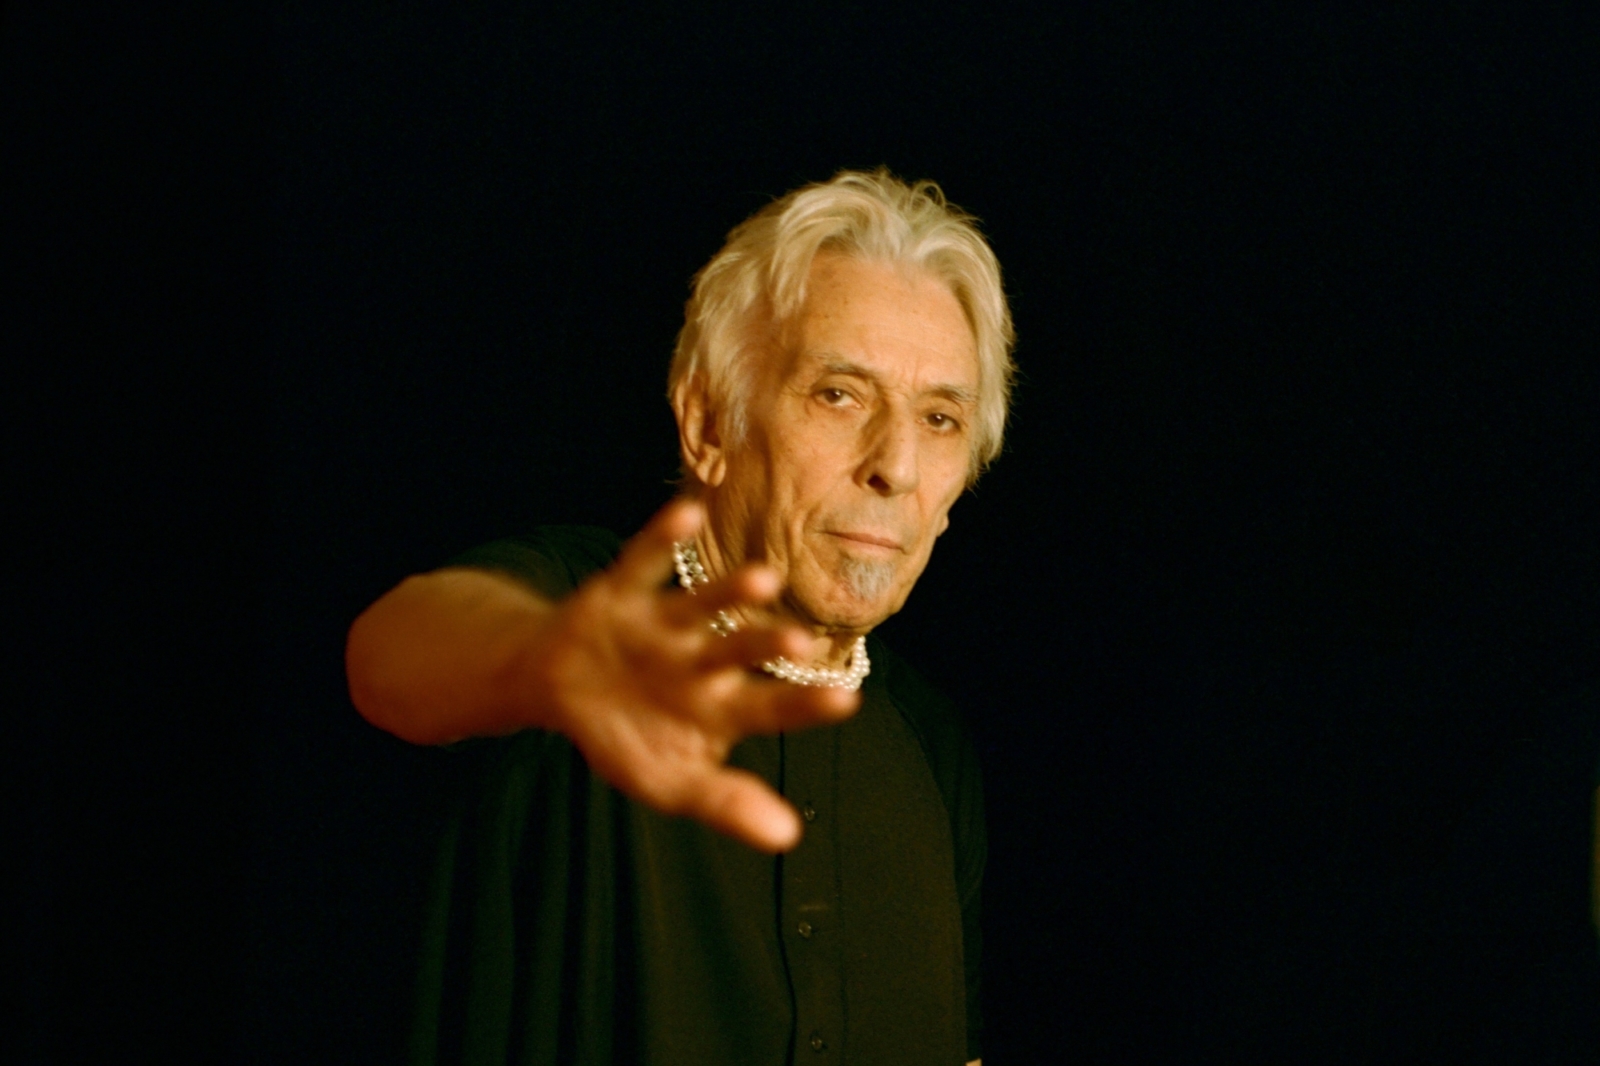 John Cale shares new song 'Story Of Blood' with Weyes Blood